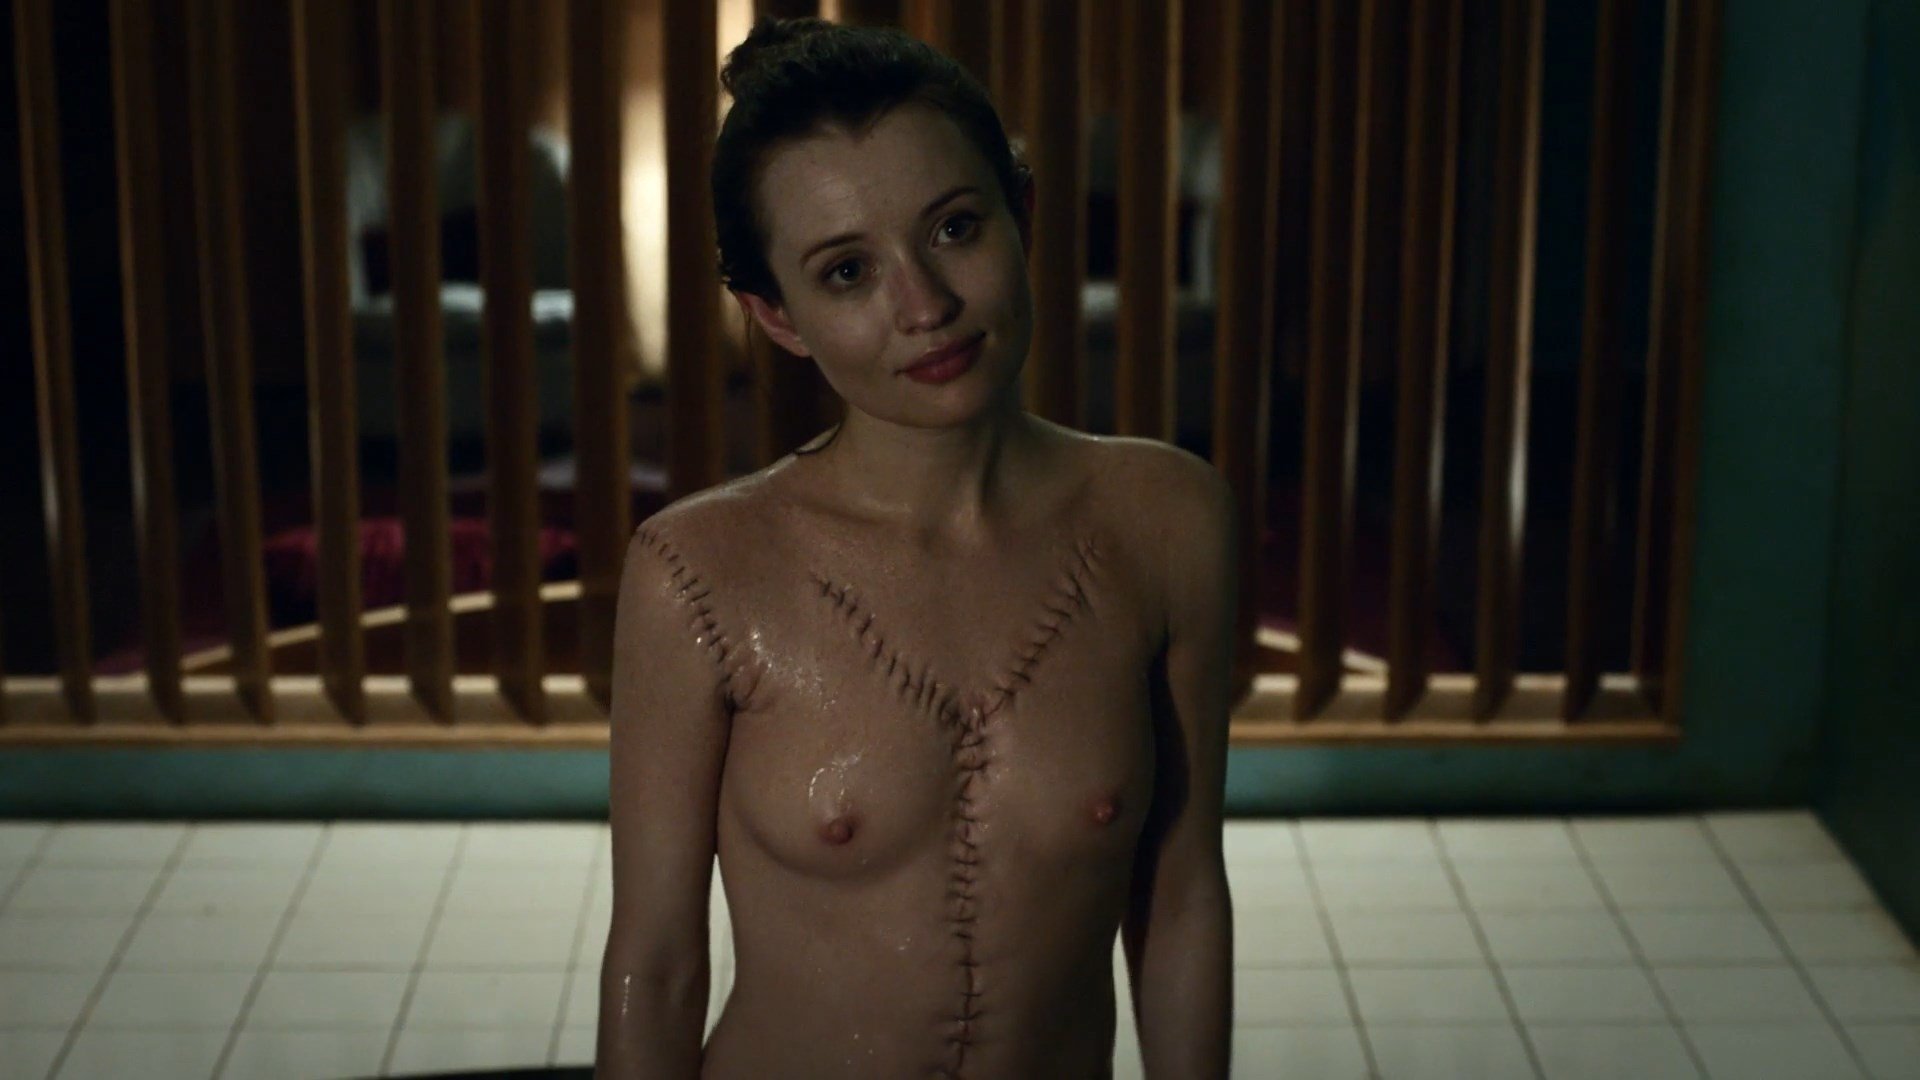 Emily Browning Nude - American Gods (2017) s01e05 - HD 1080p